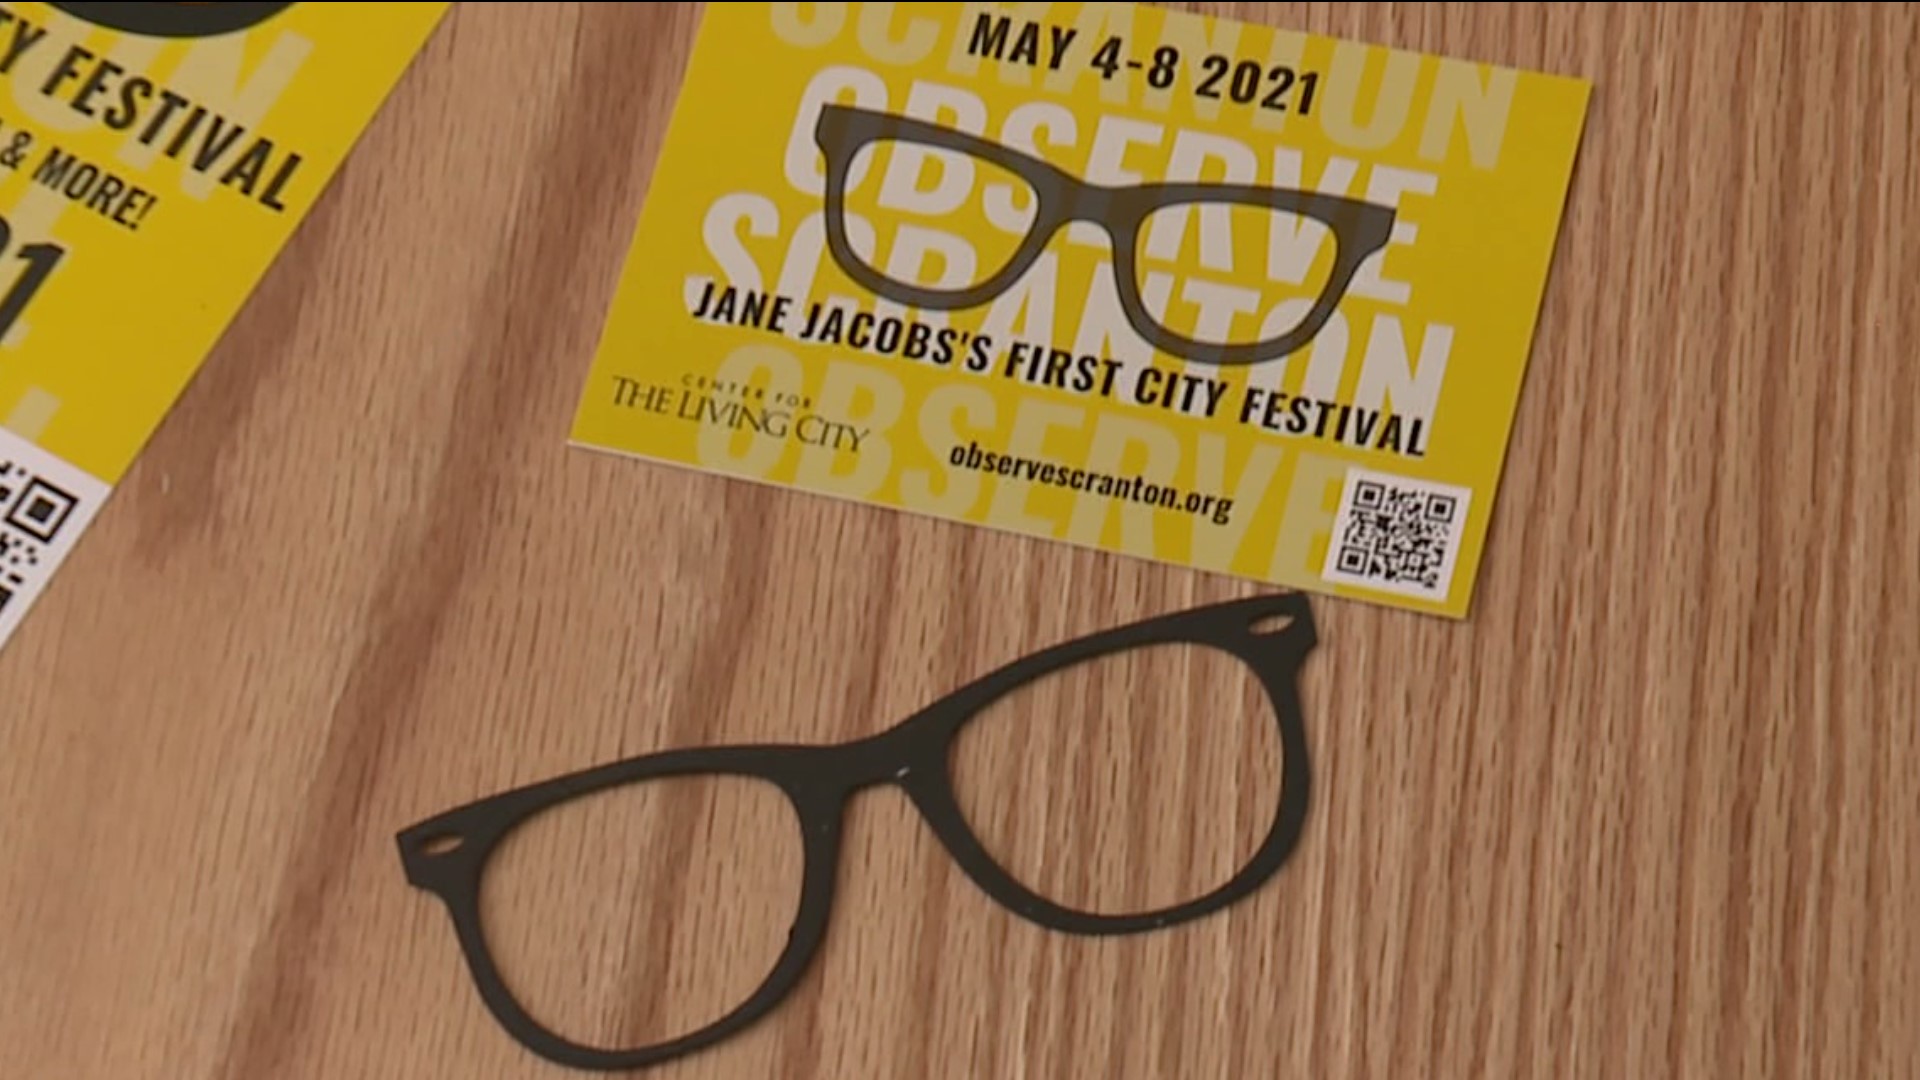 The festival honors the life of Jane Jacobs, on what would have been her 105th birthday